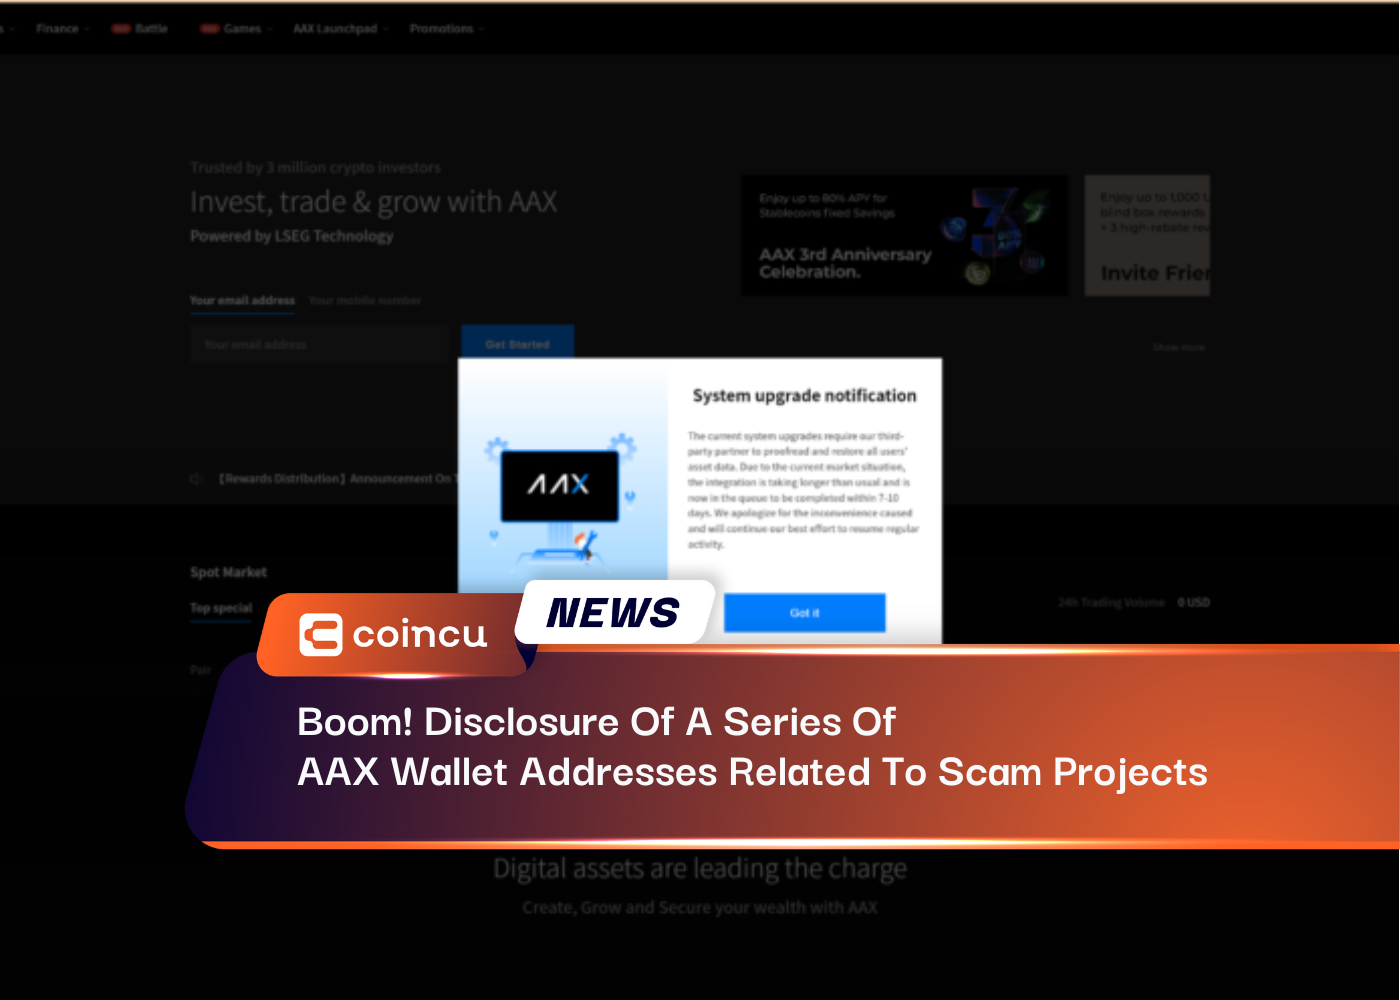 Boom! Disclosure Of A Series Of AAX Wallet Addresses Related To Scam Projects